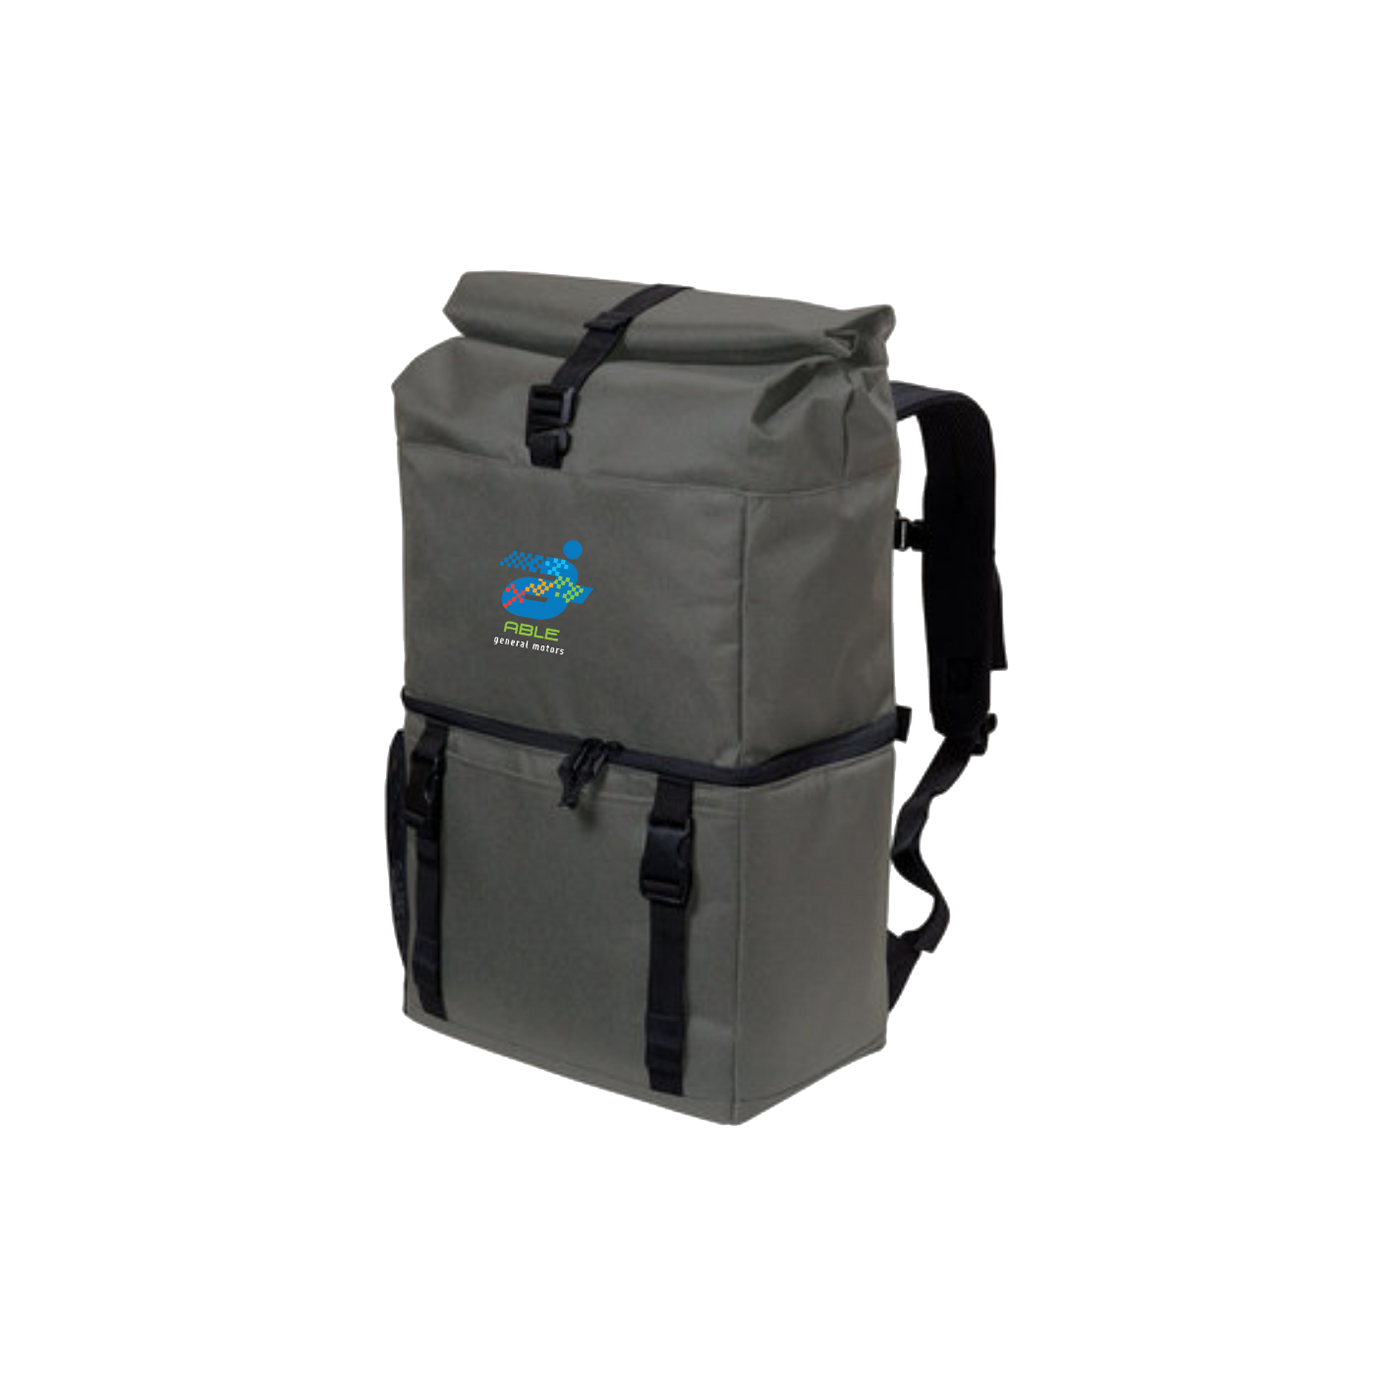 GM ABLE ERG Backpack Cooler